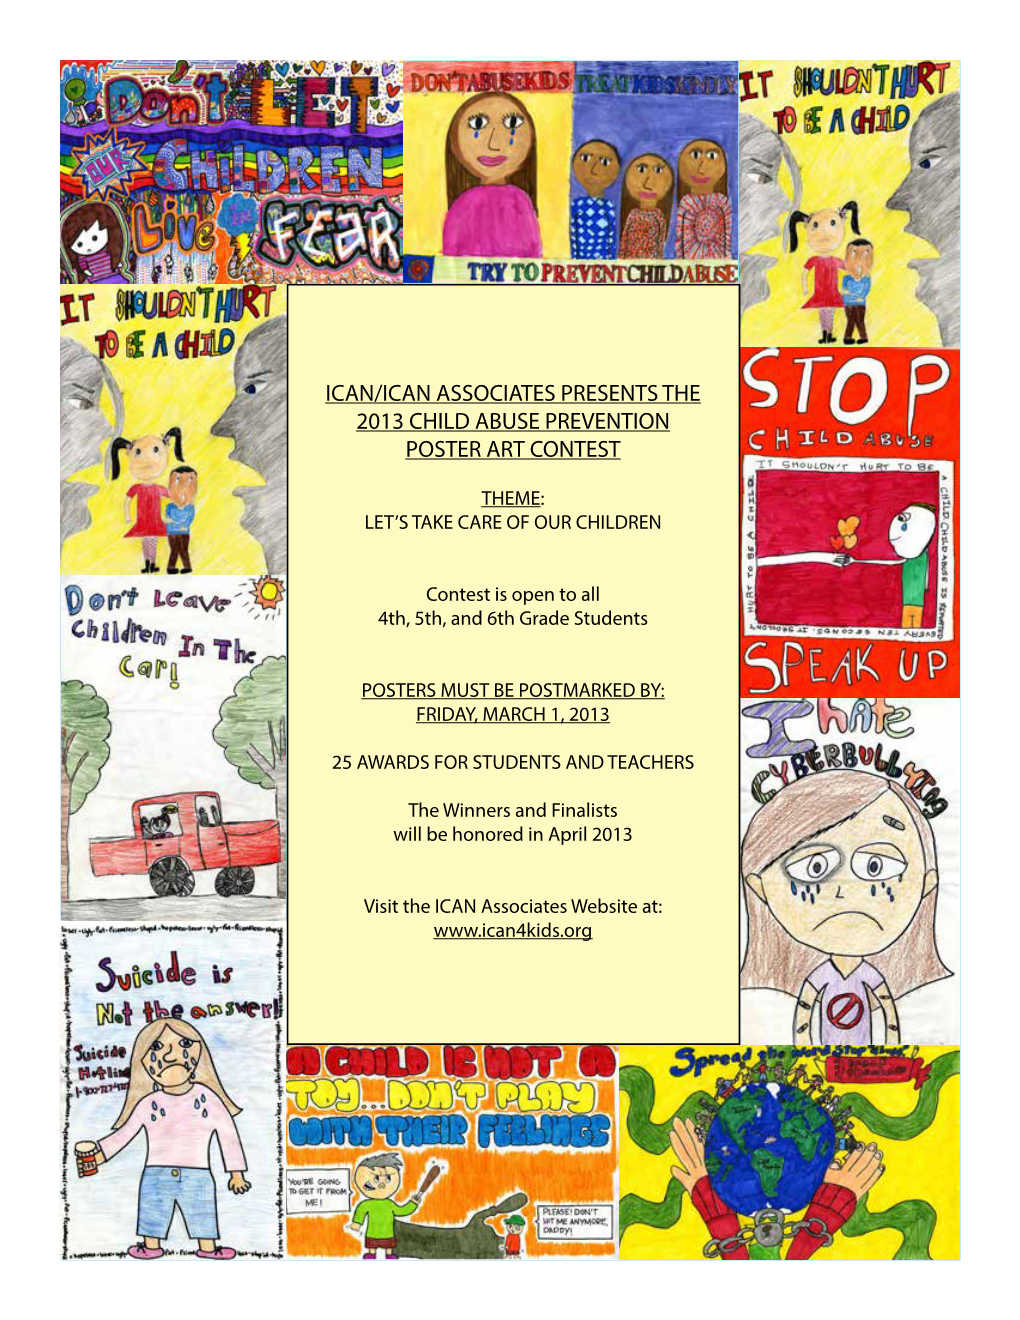 Ican/Ican Associates Presents the 2013 Child Abuse Prevention Poster Art Contest